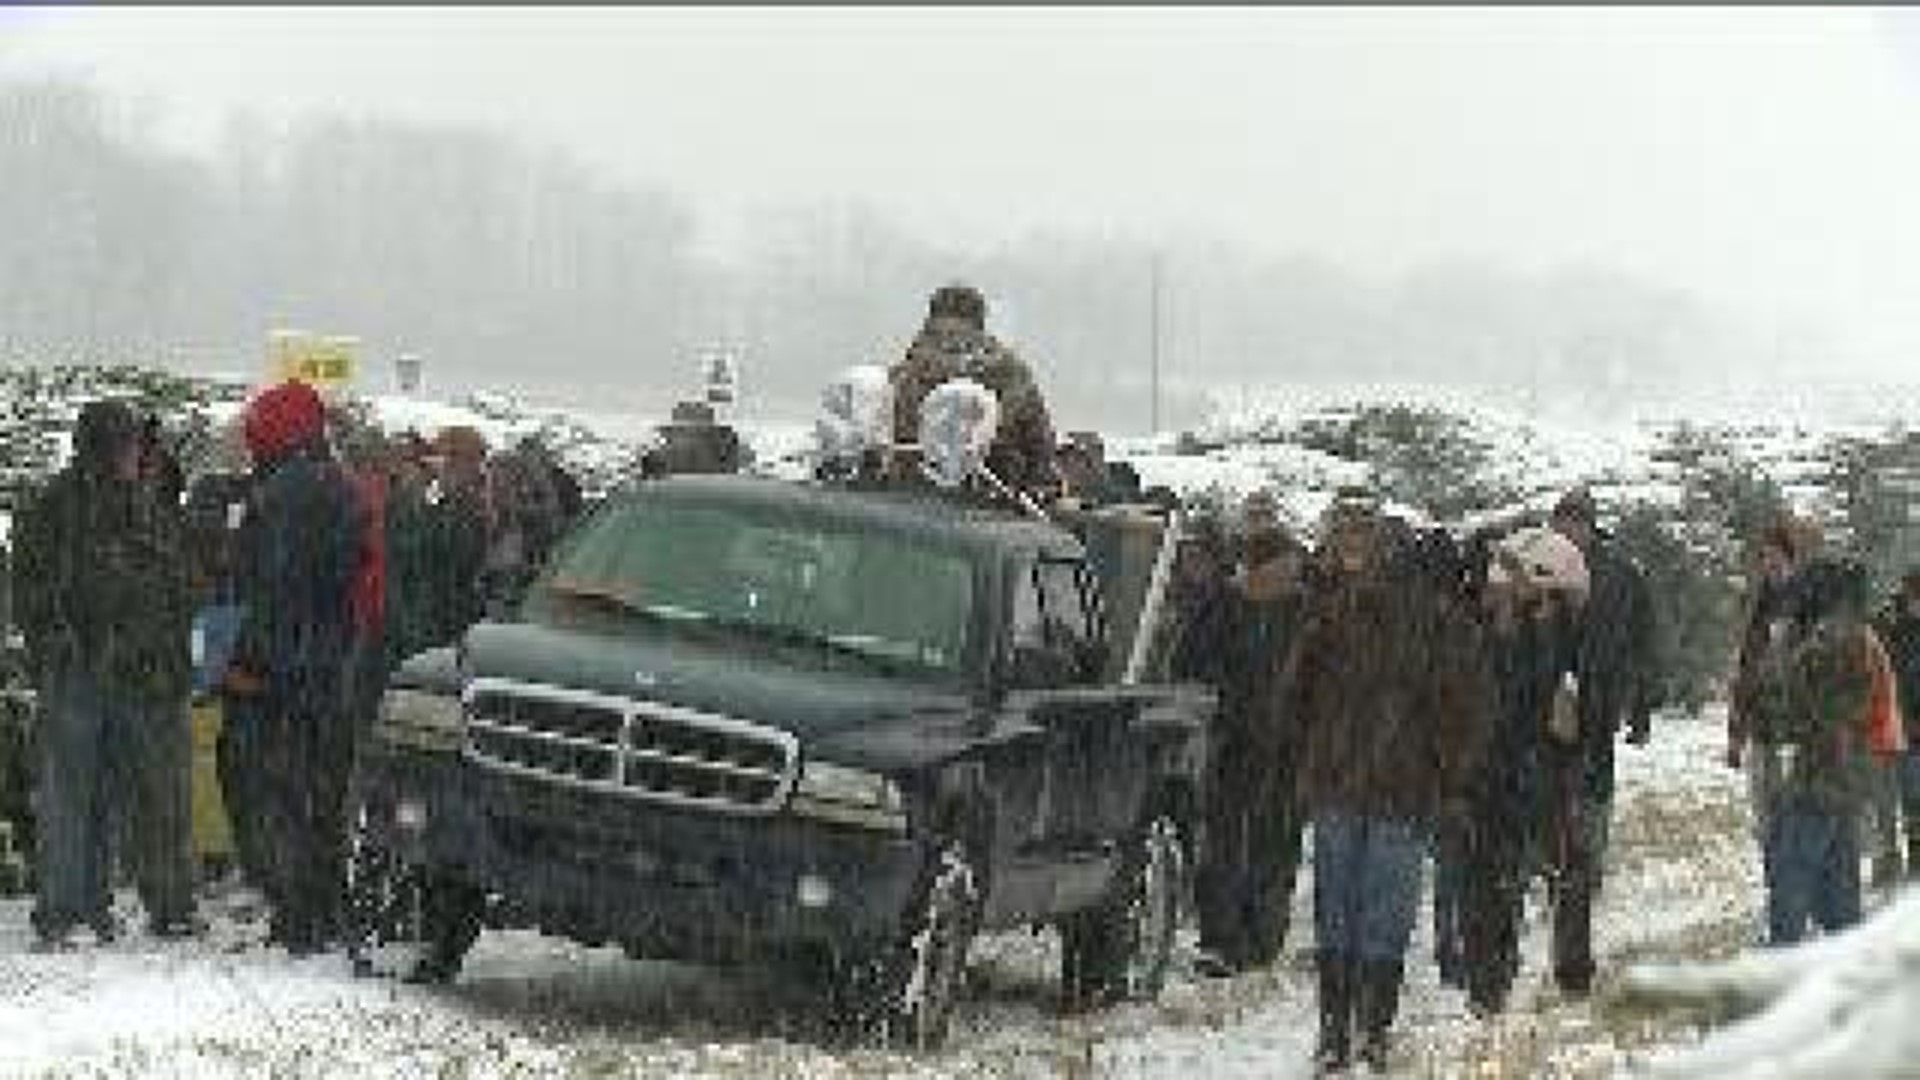 Snowy Situation at Annual Christmas Tree Auction